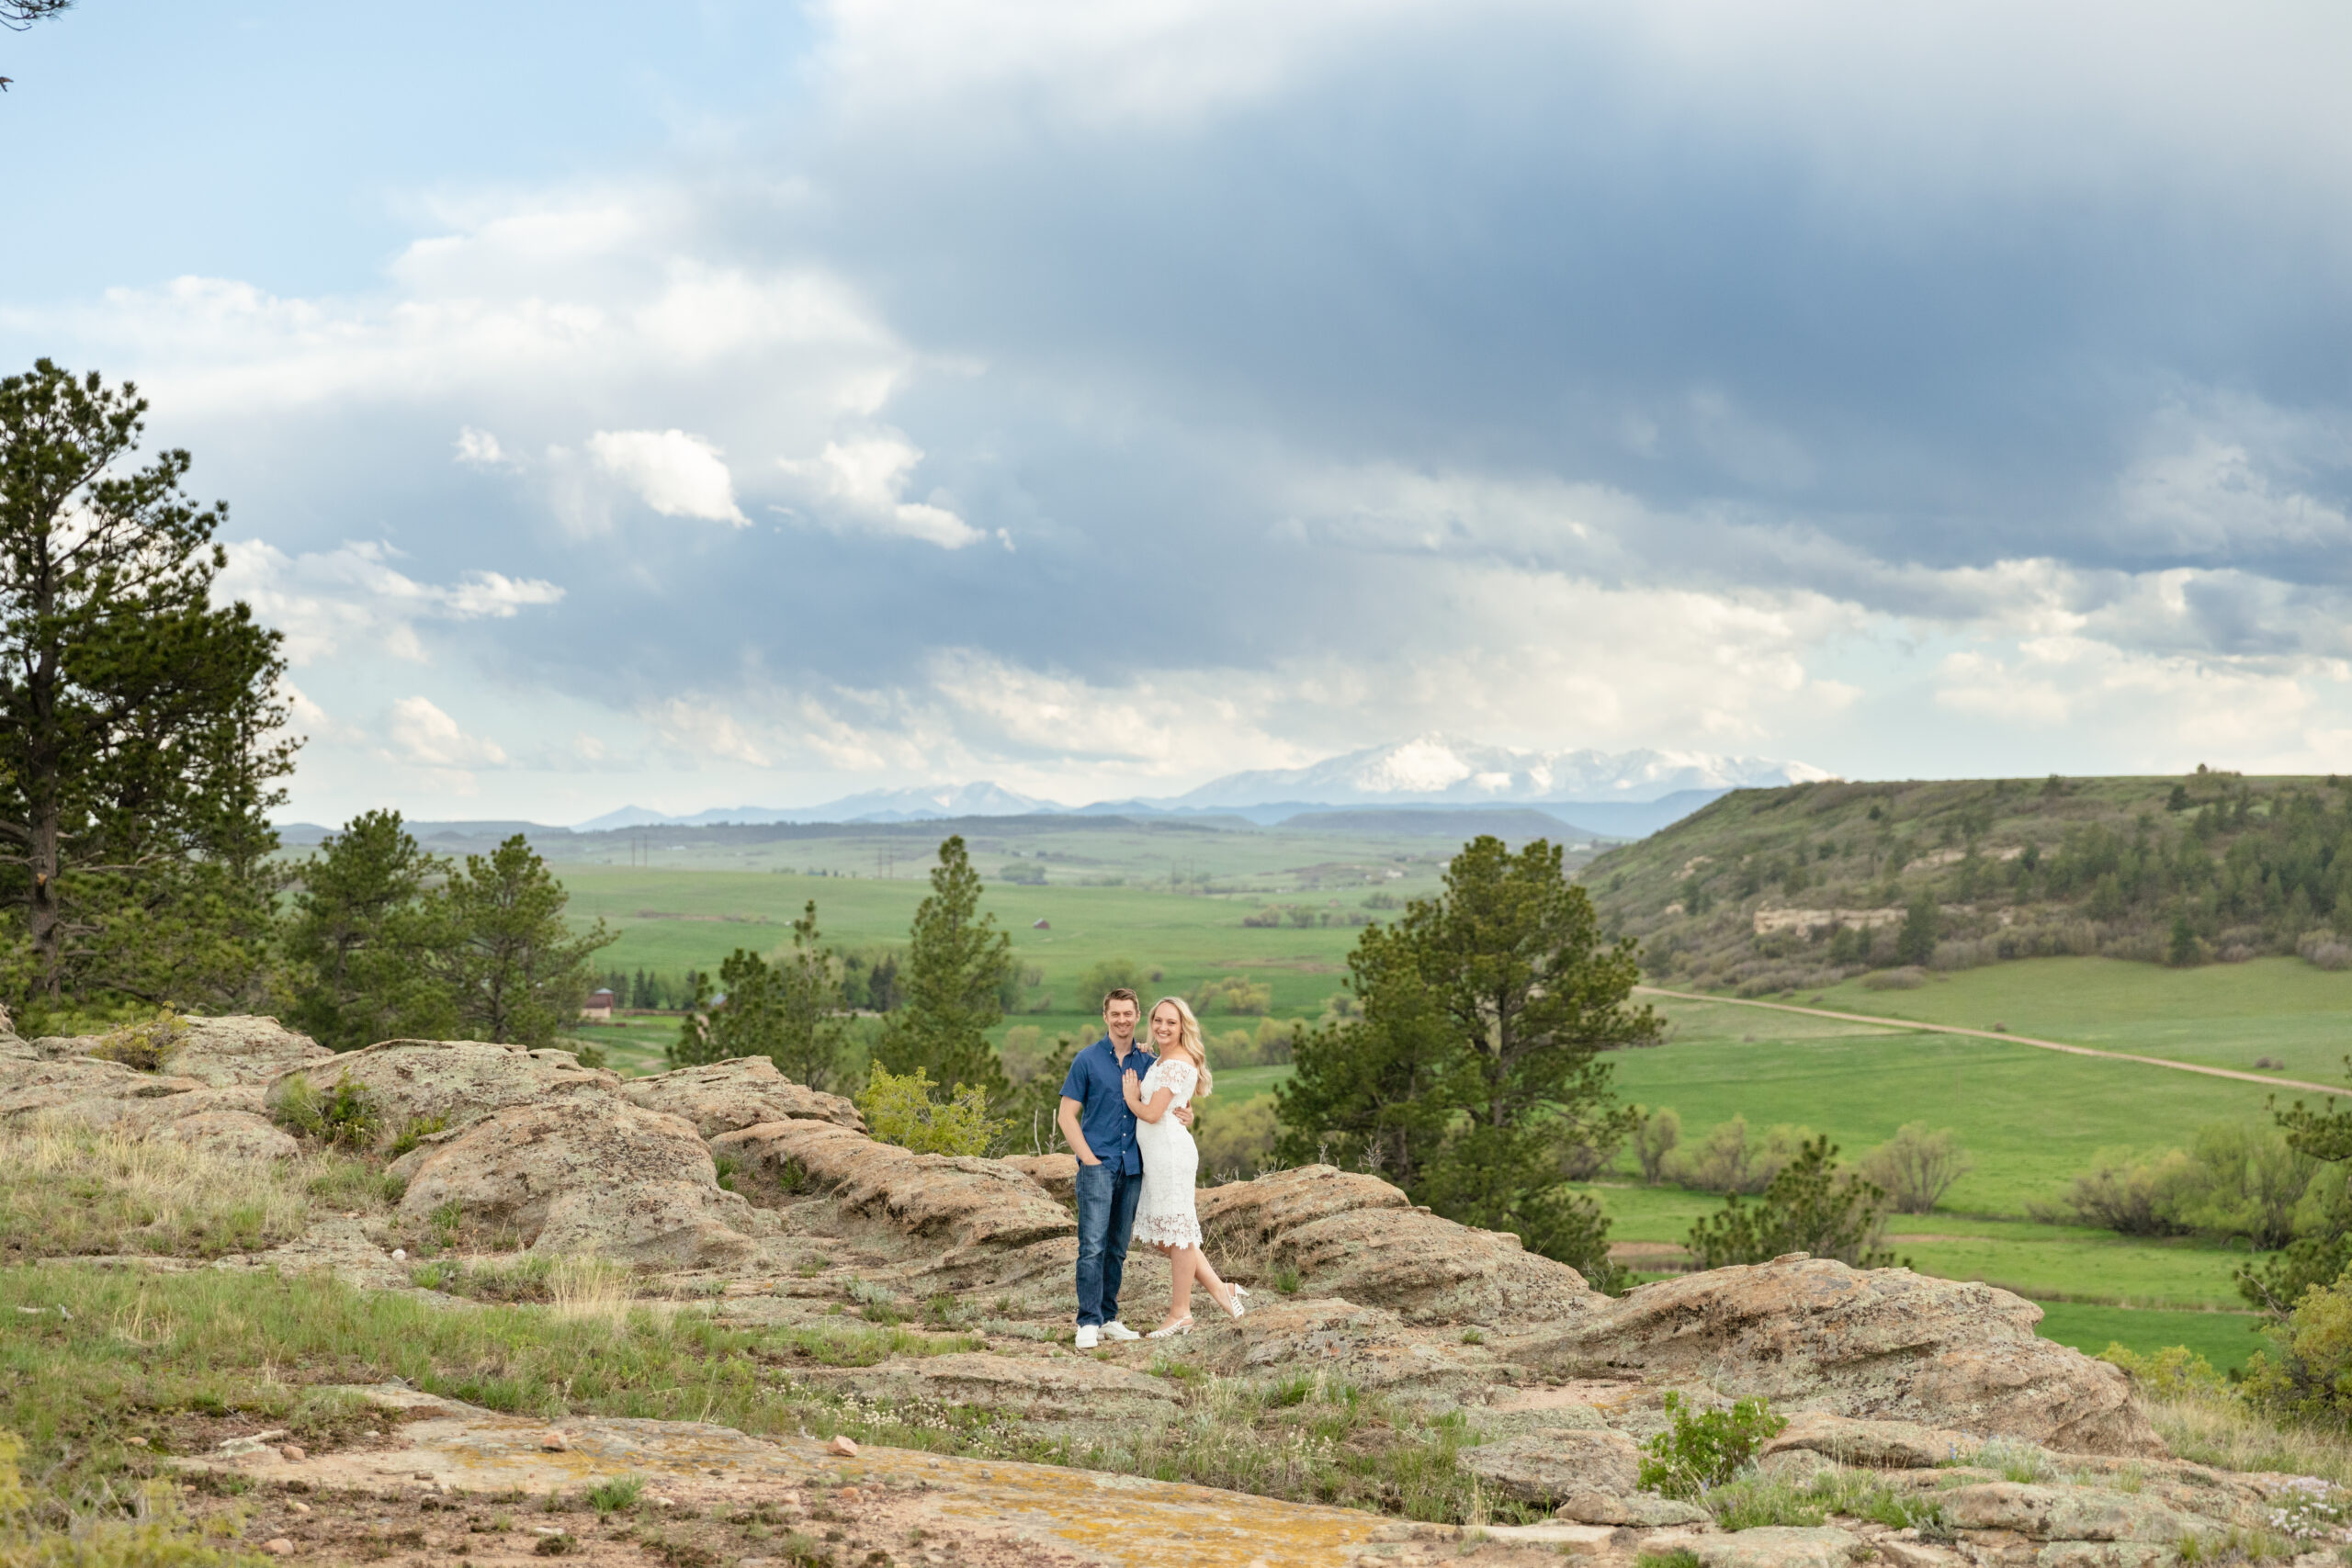 A couple poses on a rock cliff in front of green fields and mountains in the far background. The man wears a blue short sleeve button down and jeans. The woman wears a mid-length lace white dress.